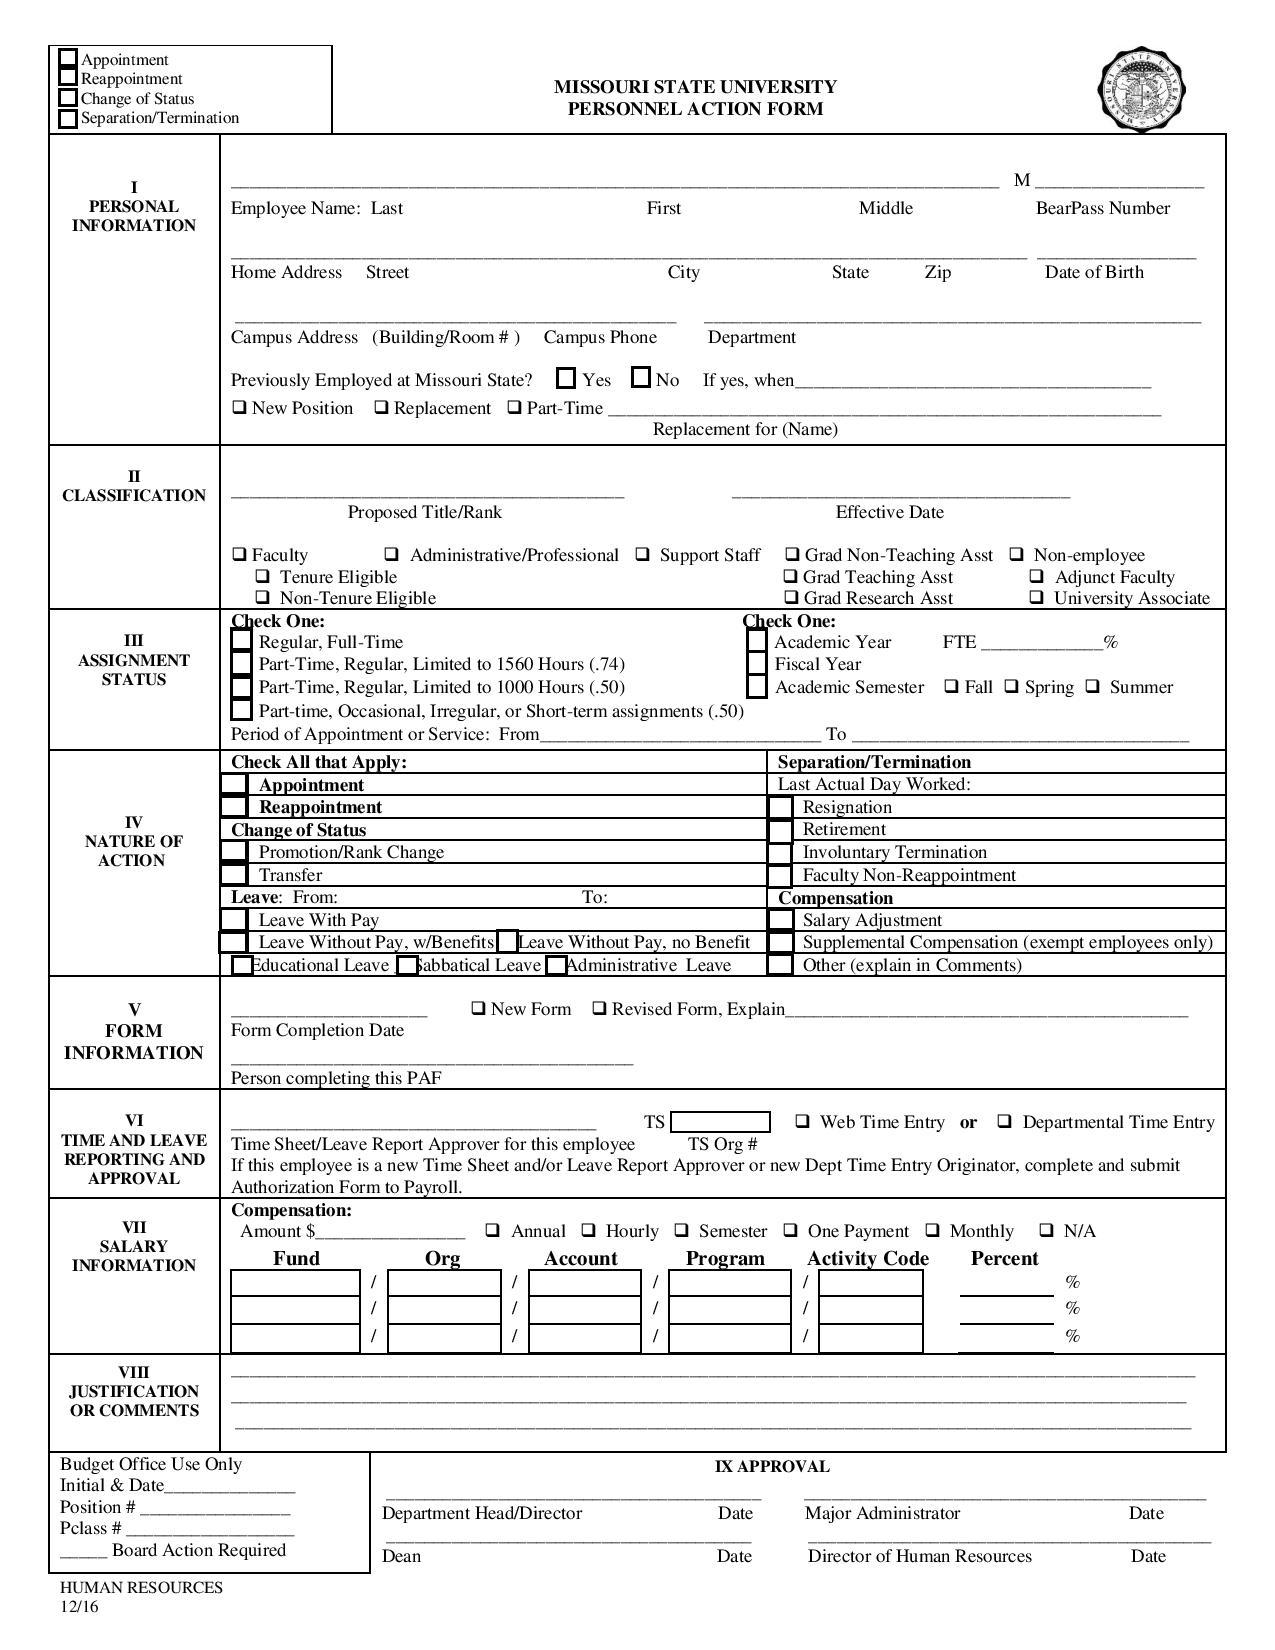 personnel action form in pdf page 0011